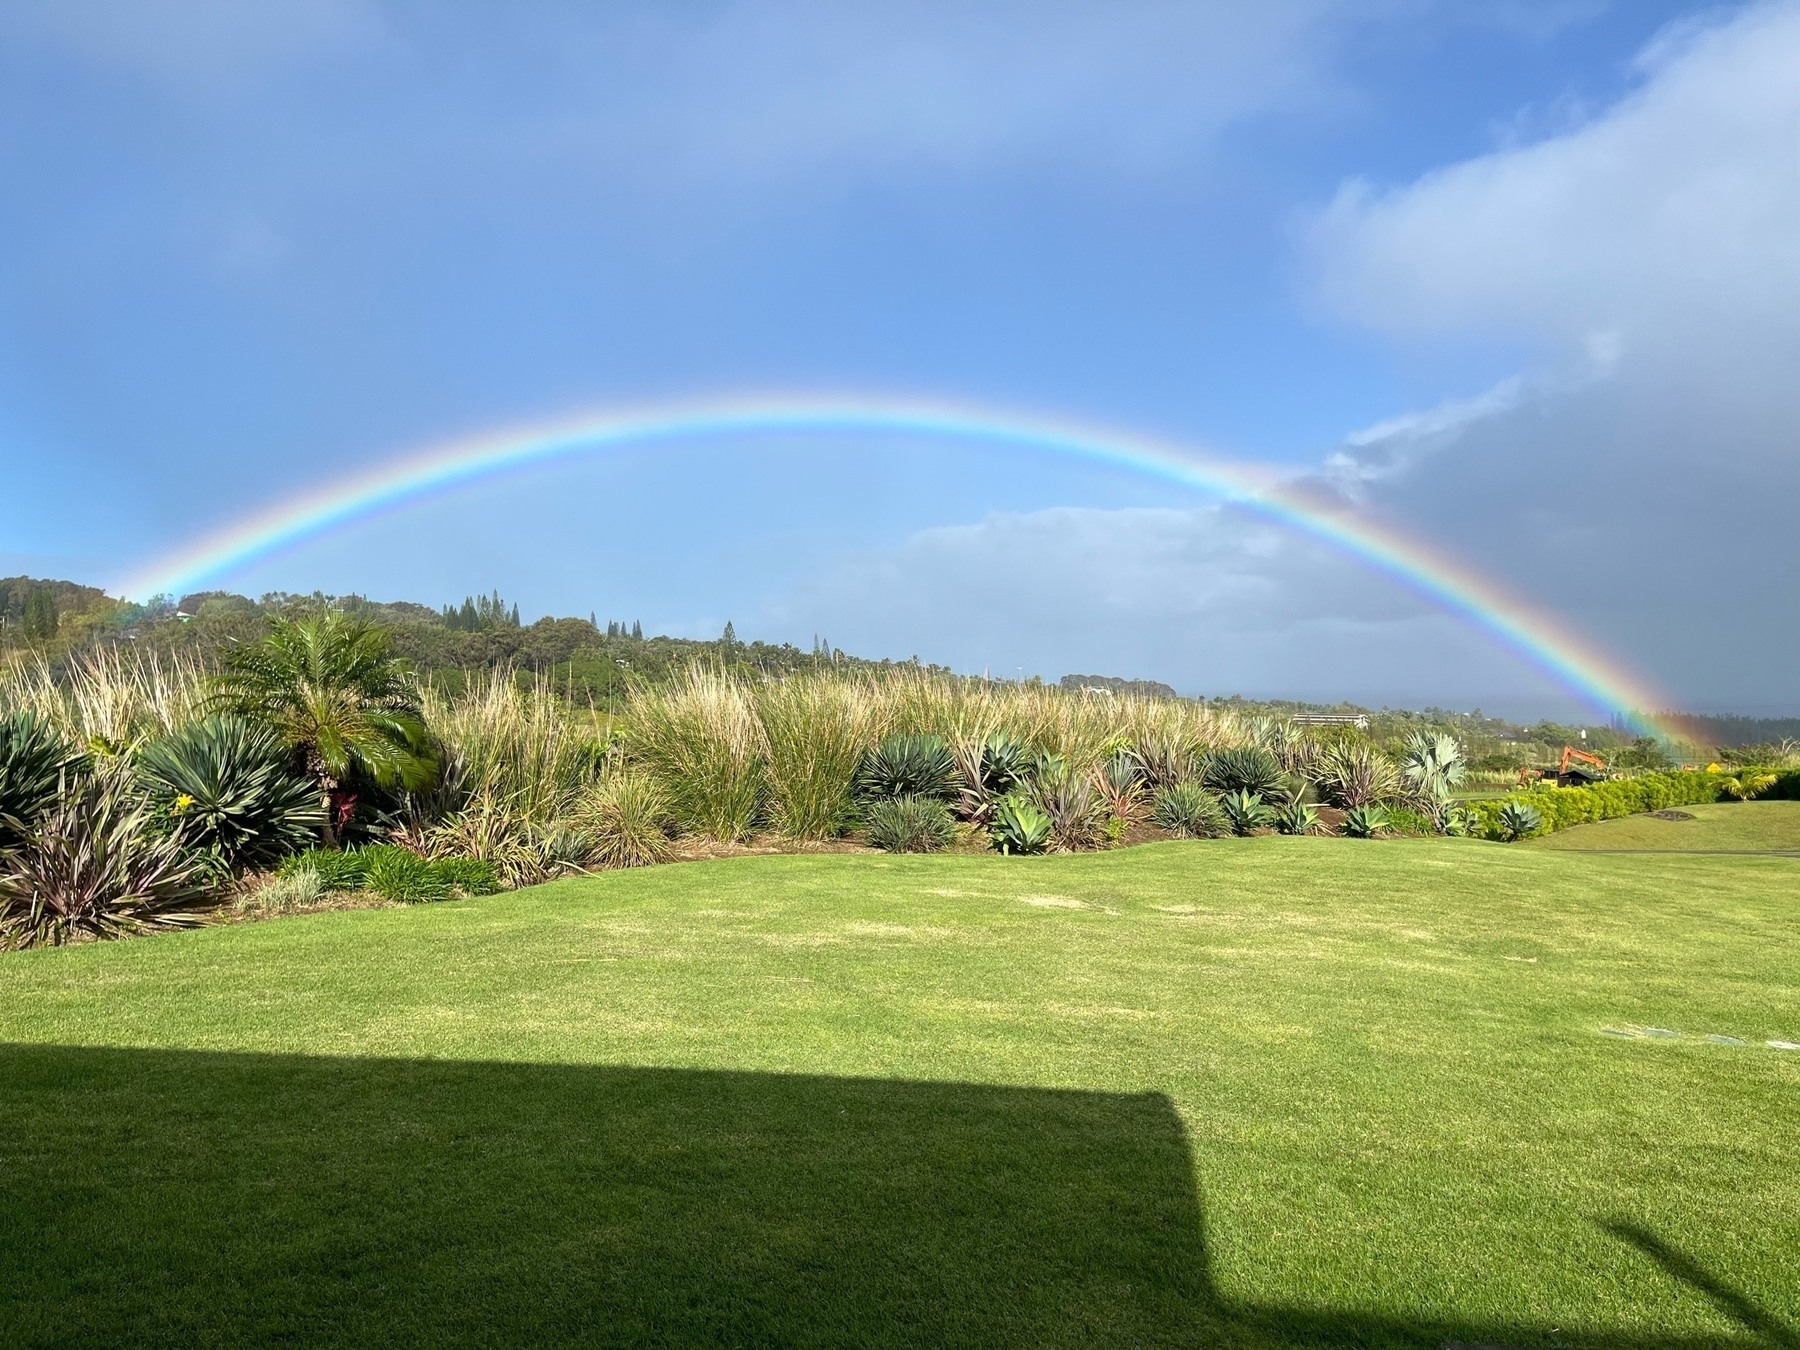 A complete rainbow arching across a small valley, grass and shrubs in the foreground, the ocean in the background